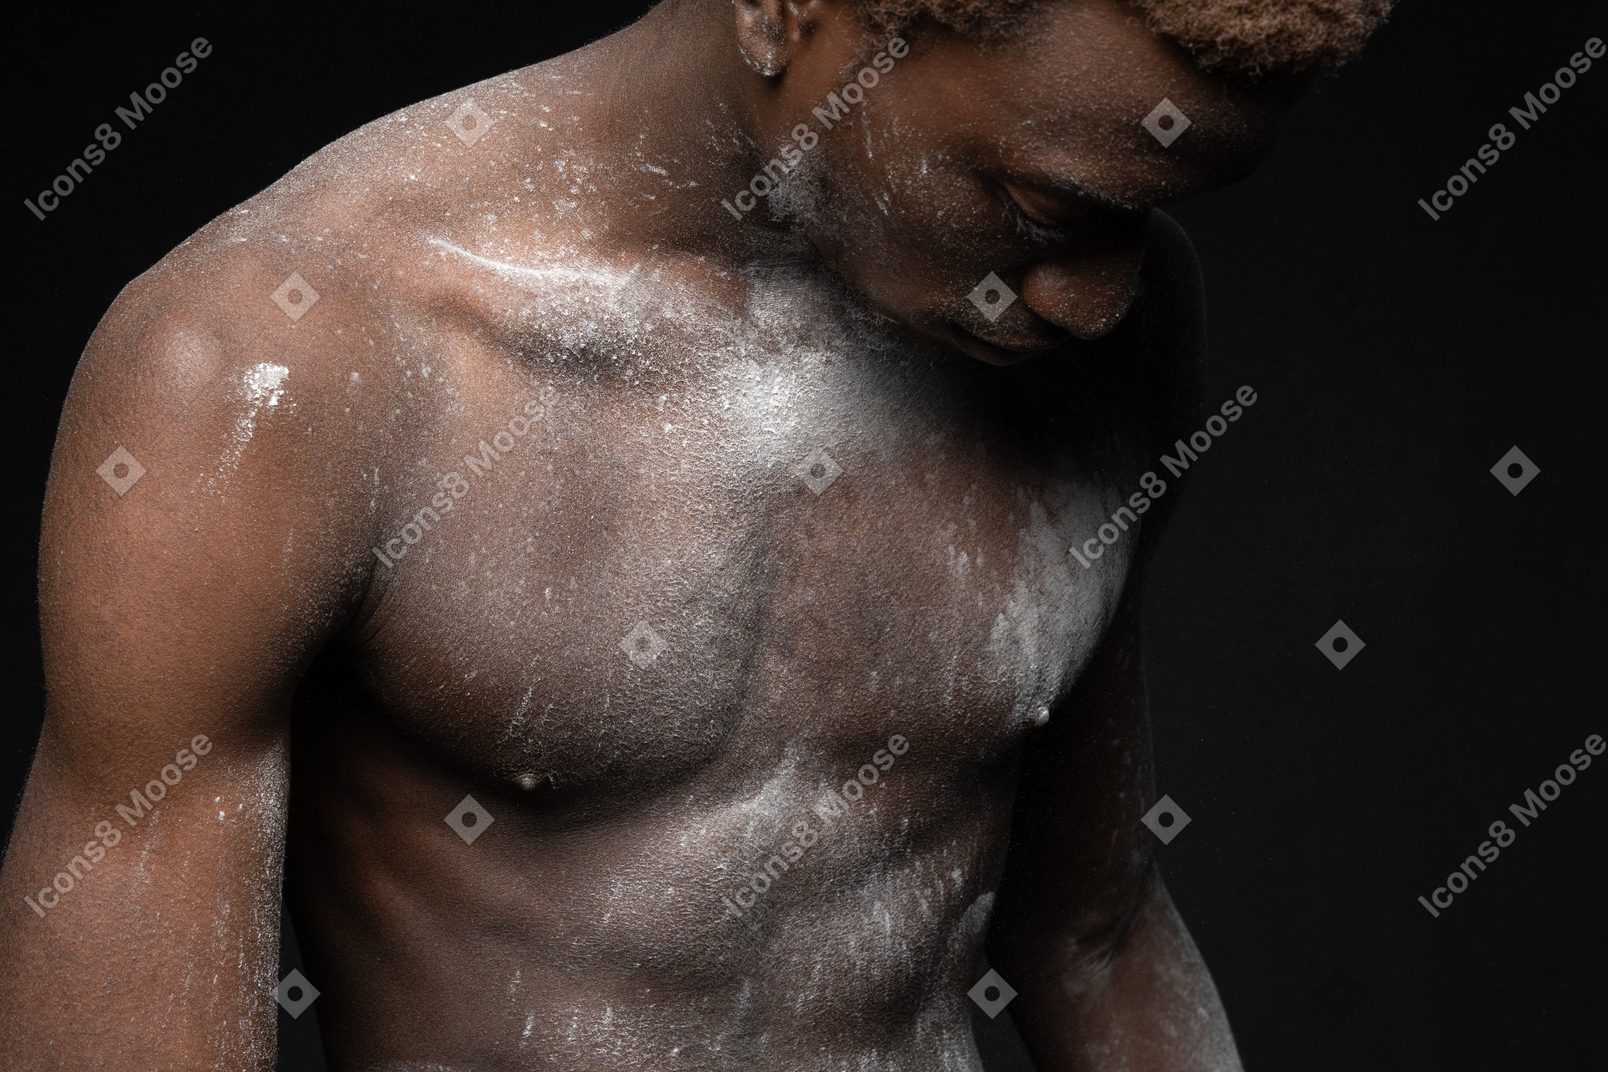 Sensual shot of a young male with his torso covered with flour